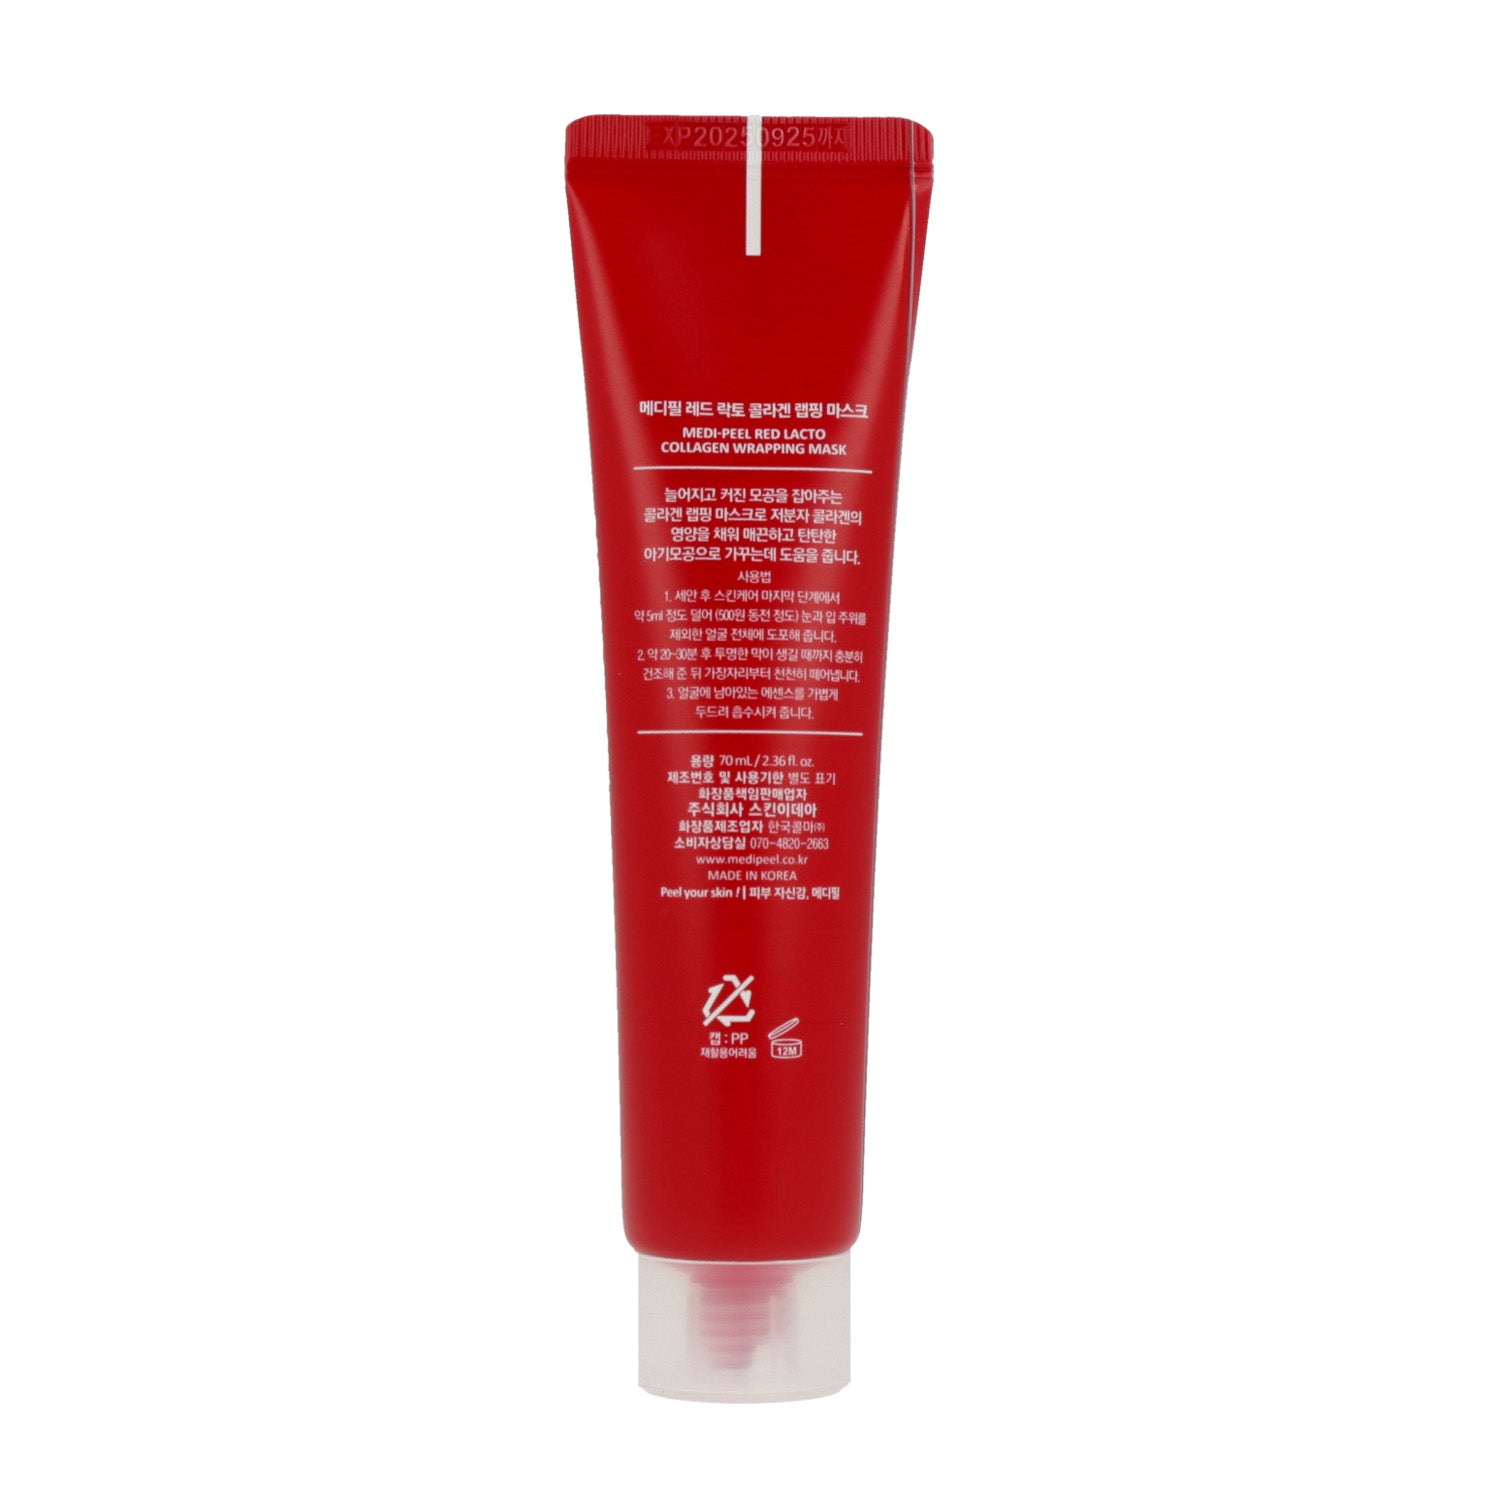 Collagen cream for sensitive skin - MEDI-PEEL Red Lacto Collagen Wrapping Mask 70ml.